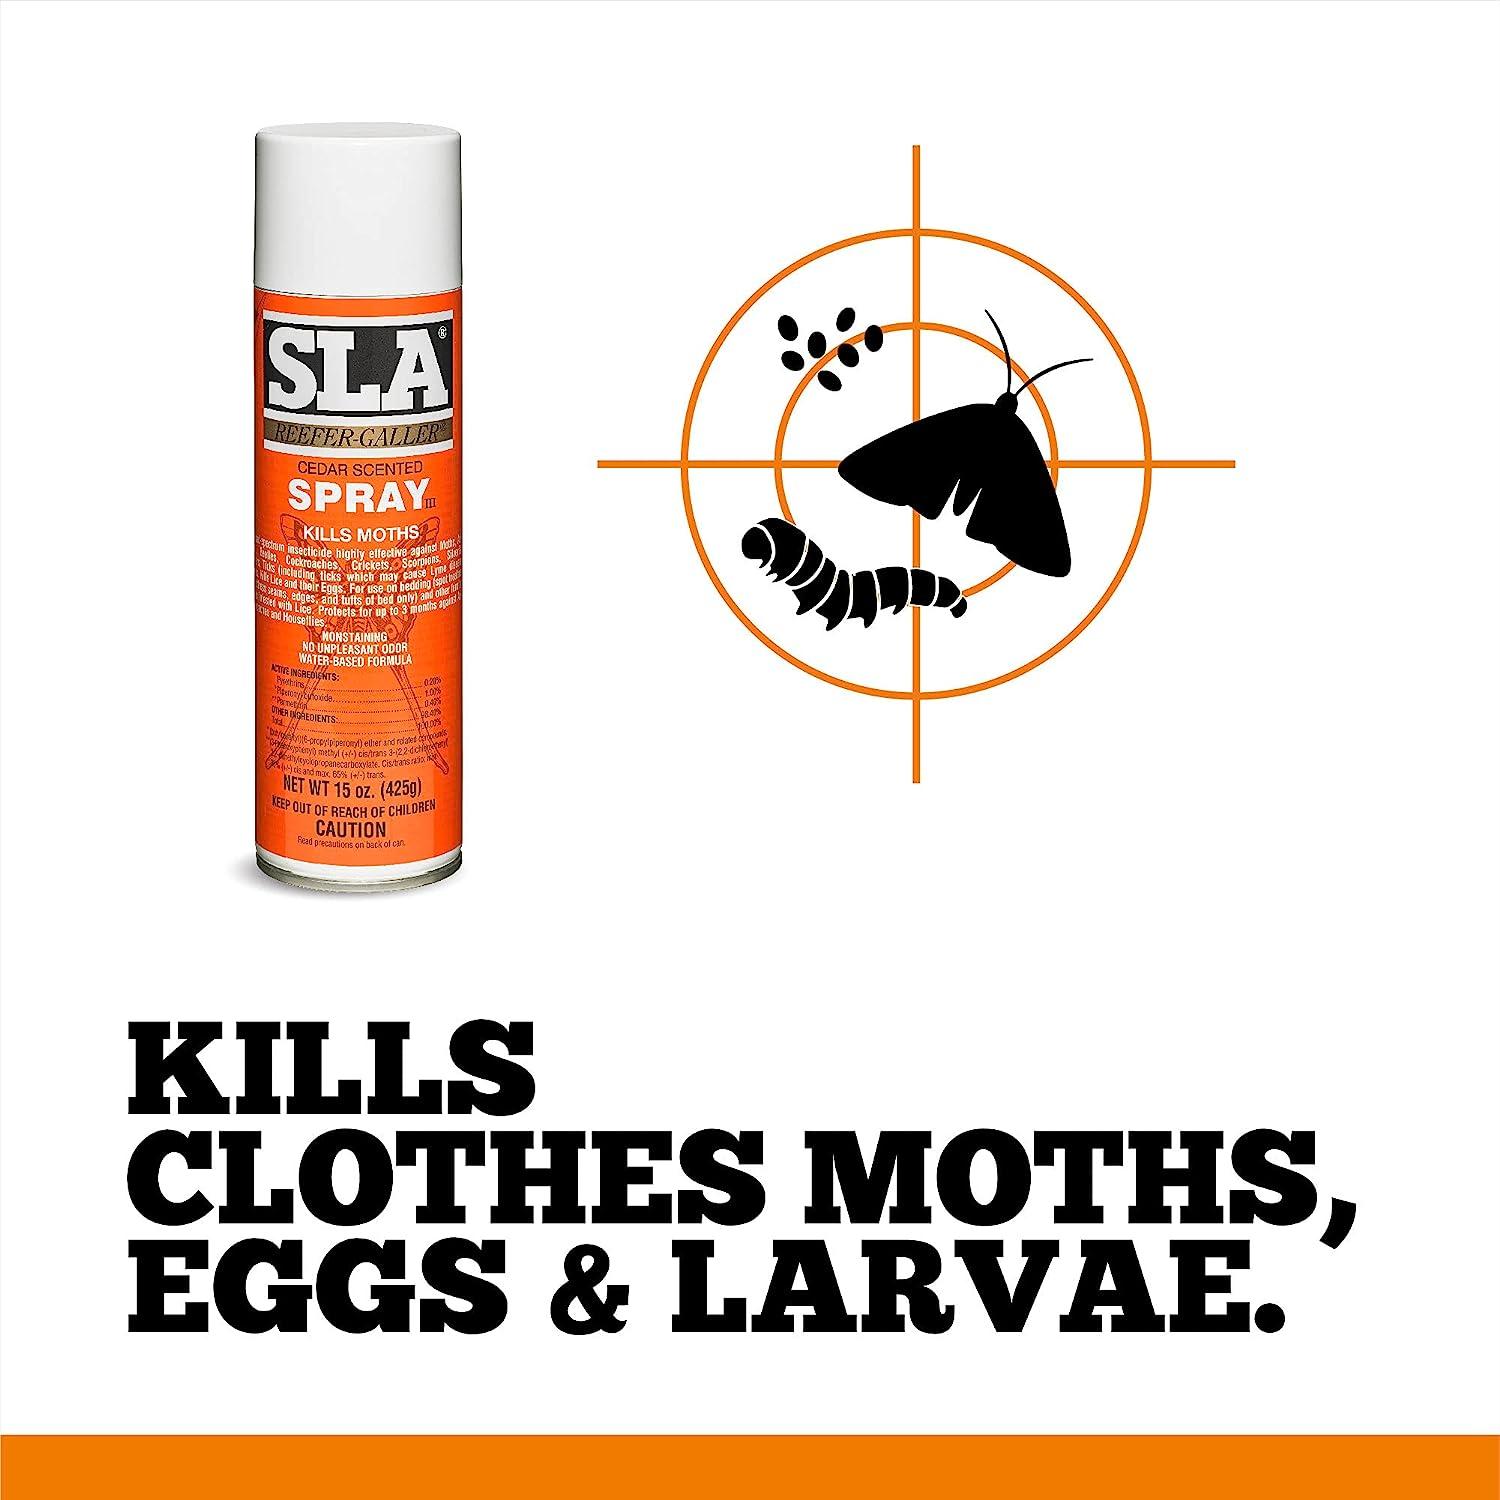 Reefer-Galler SLA Cedar Scented Moth Repellent Spray - Kills Moths Bed Bugs  and Pests on Contact, 15 oz